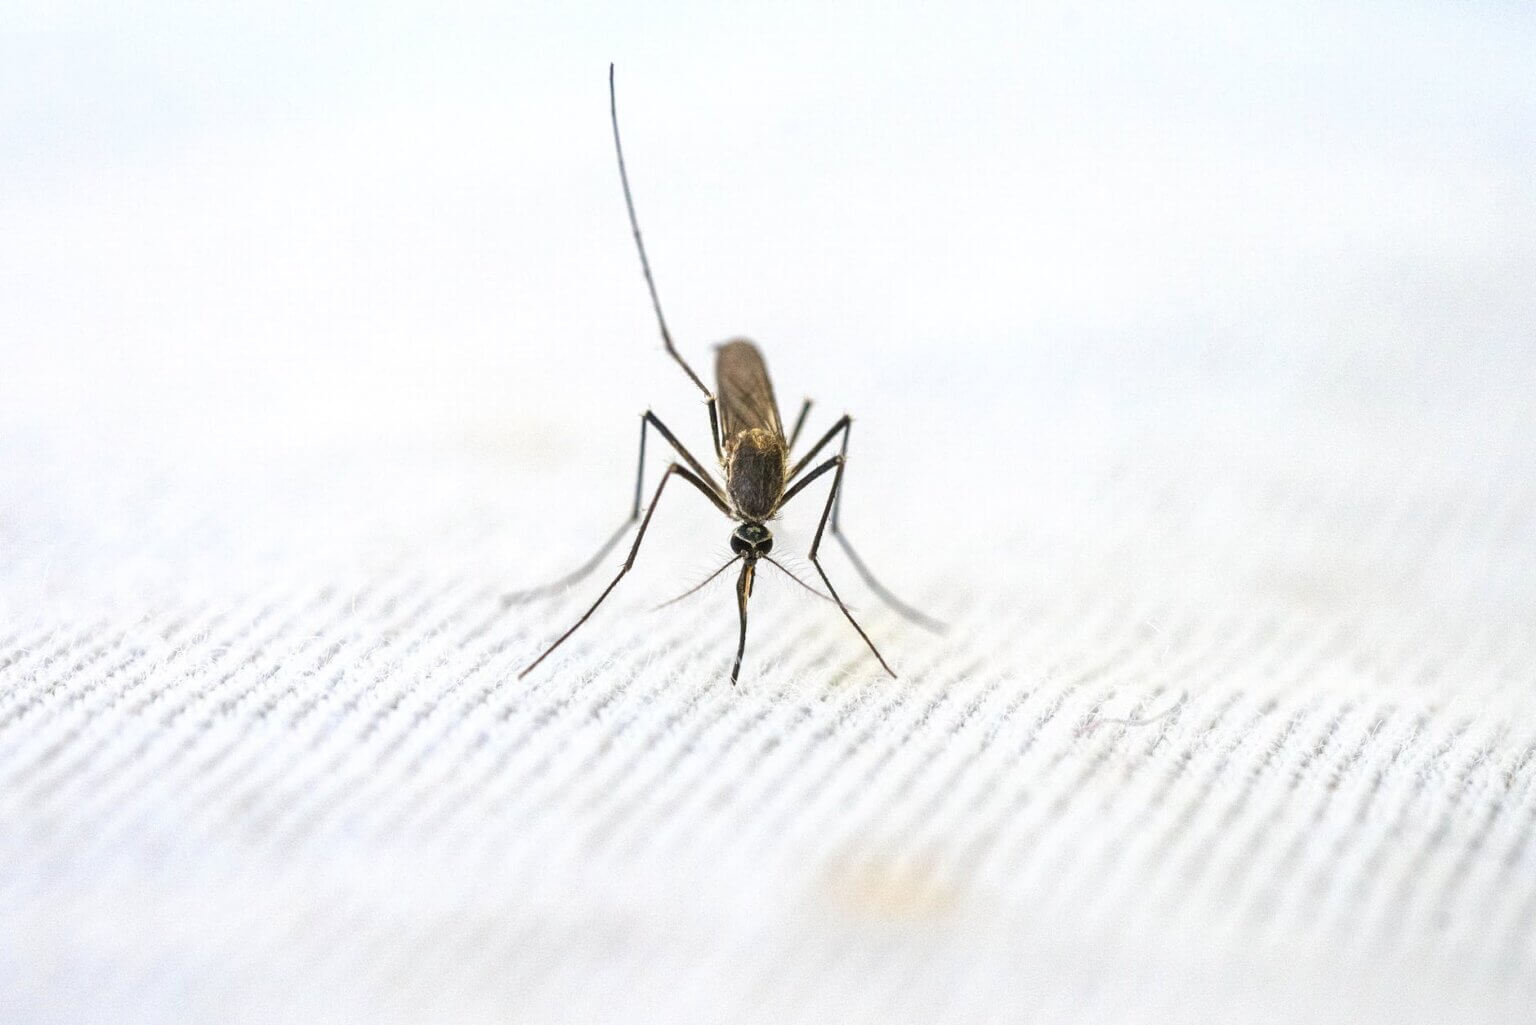 close up view of mosquito